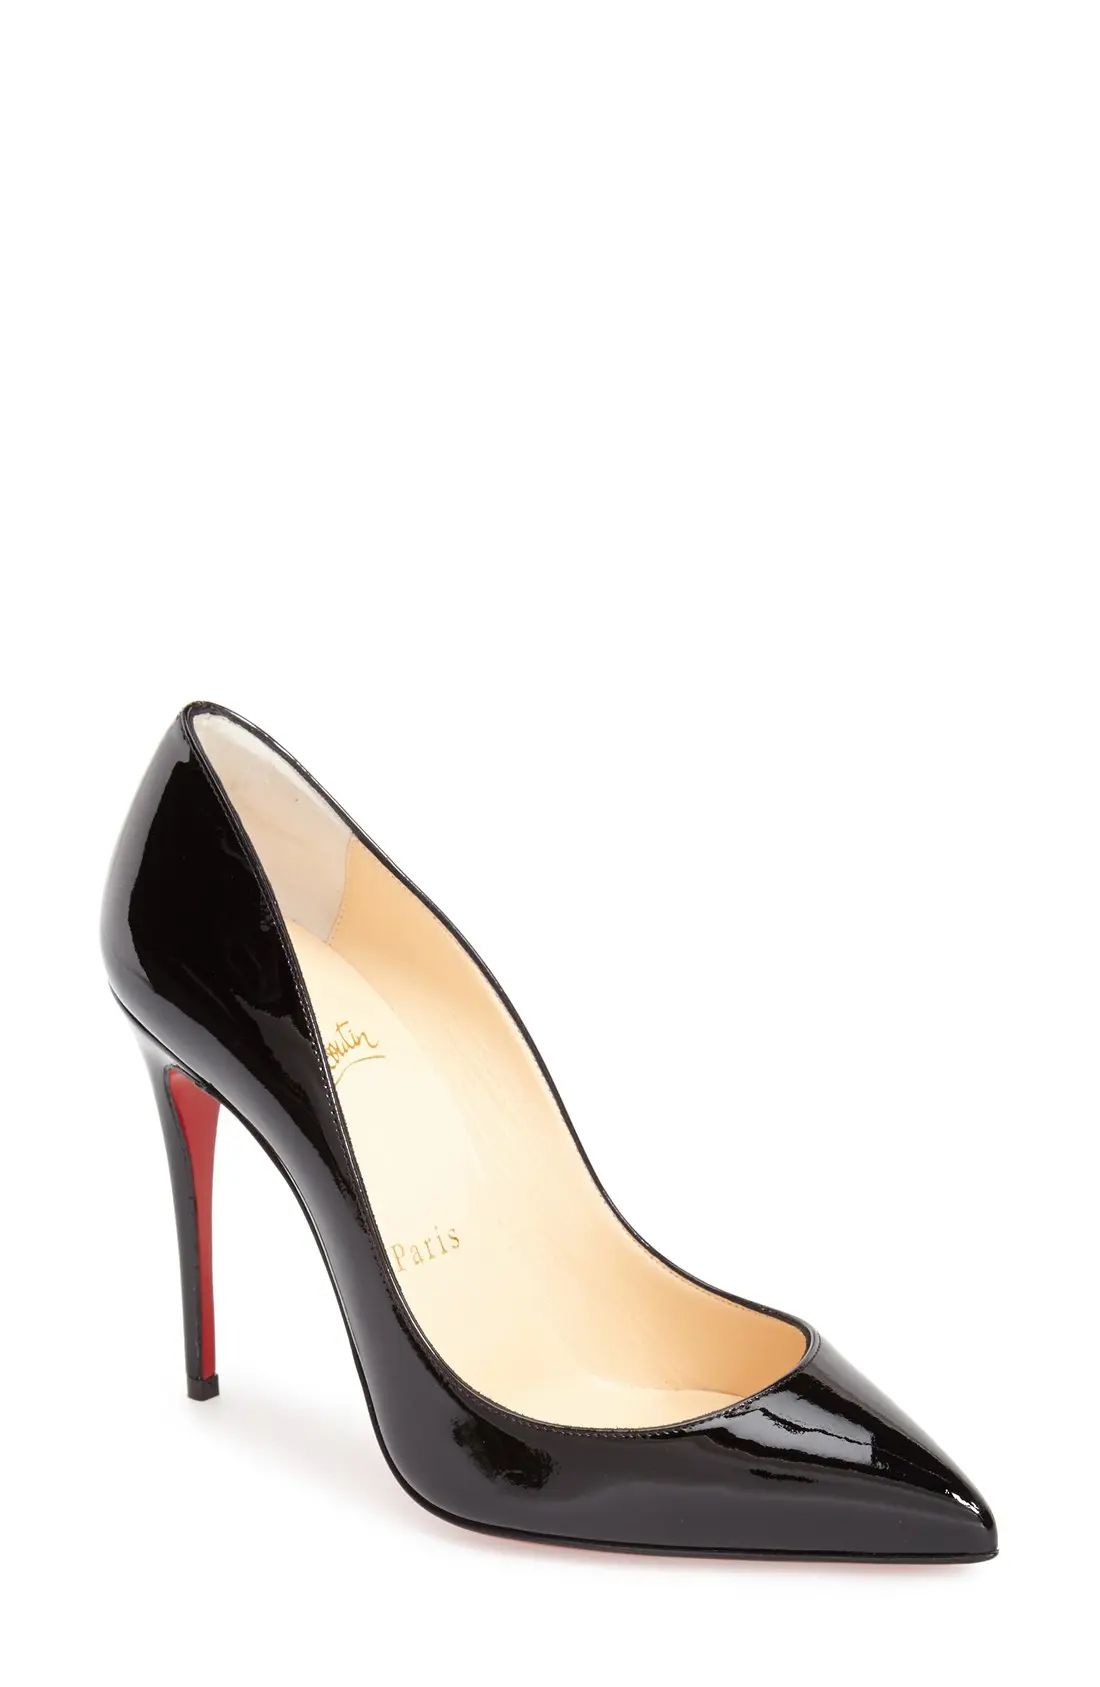 Christian Louboutin 'Pigalle Follies' Pointy Toe Pump | Nordstrom